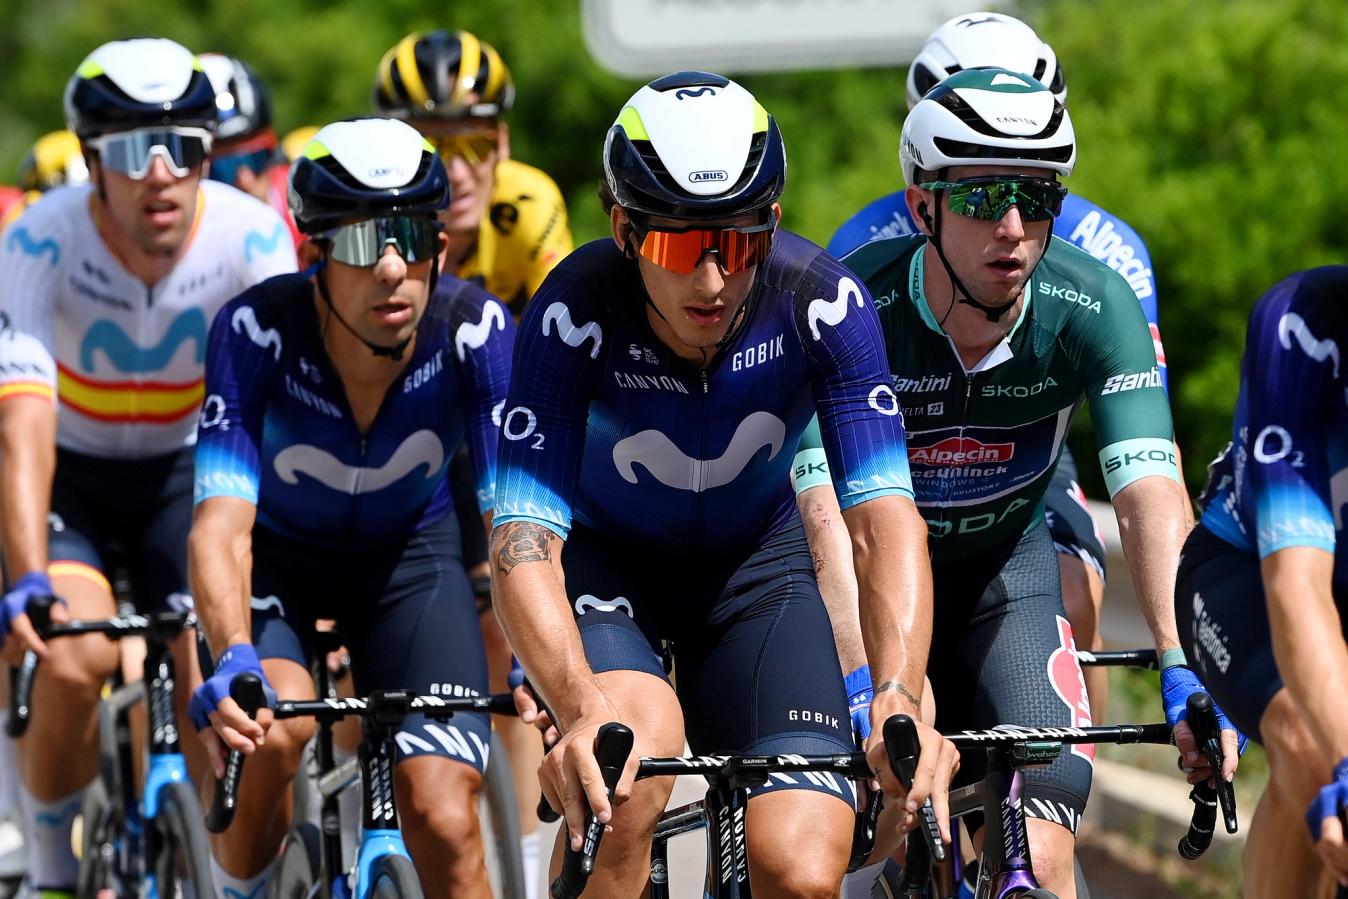 Abus have a range of helmets which they offer to Movistar and Alpecin-Deceuninck